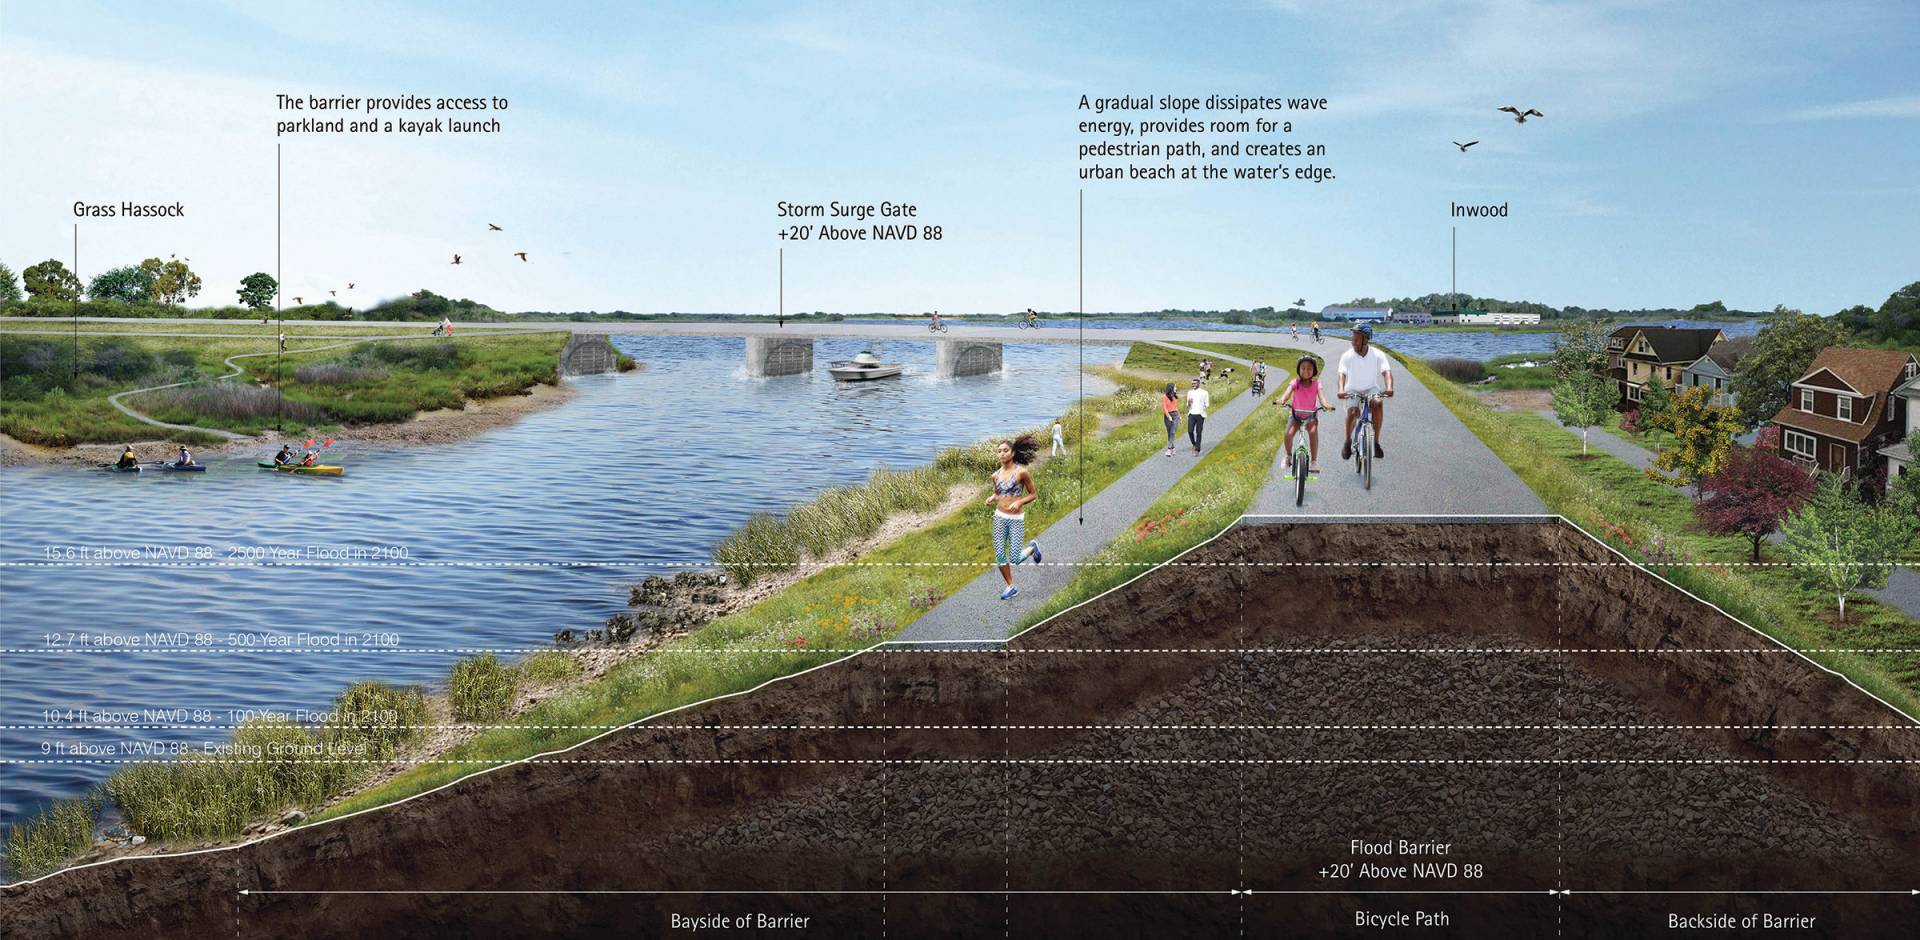 Diagram of proposed storm surge barrier at Jamaica Bay